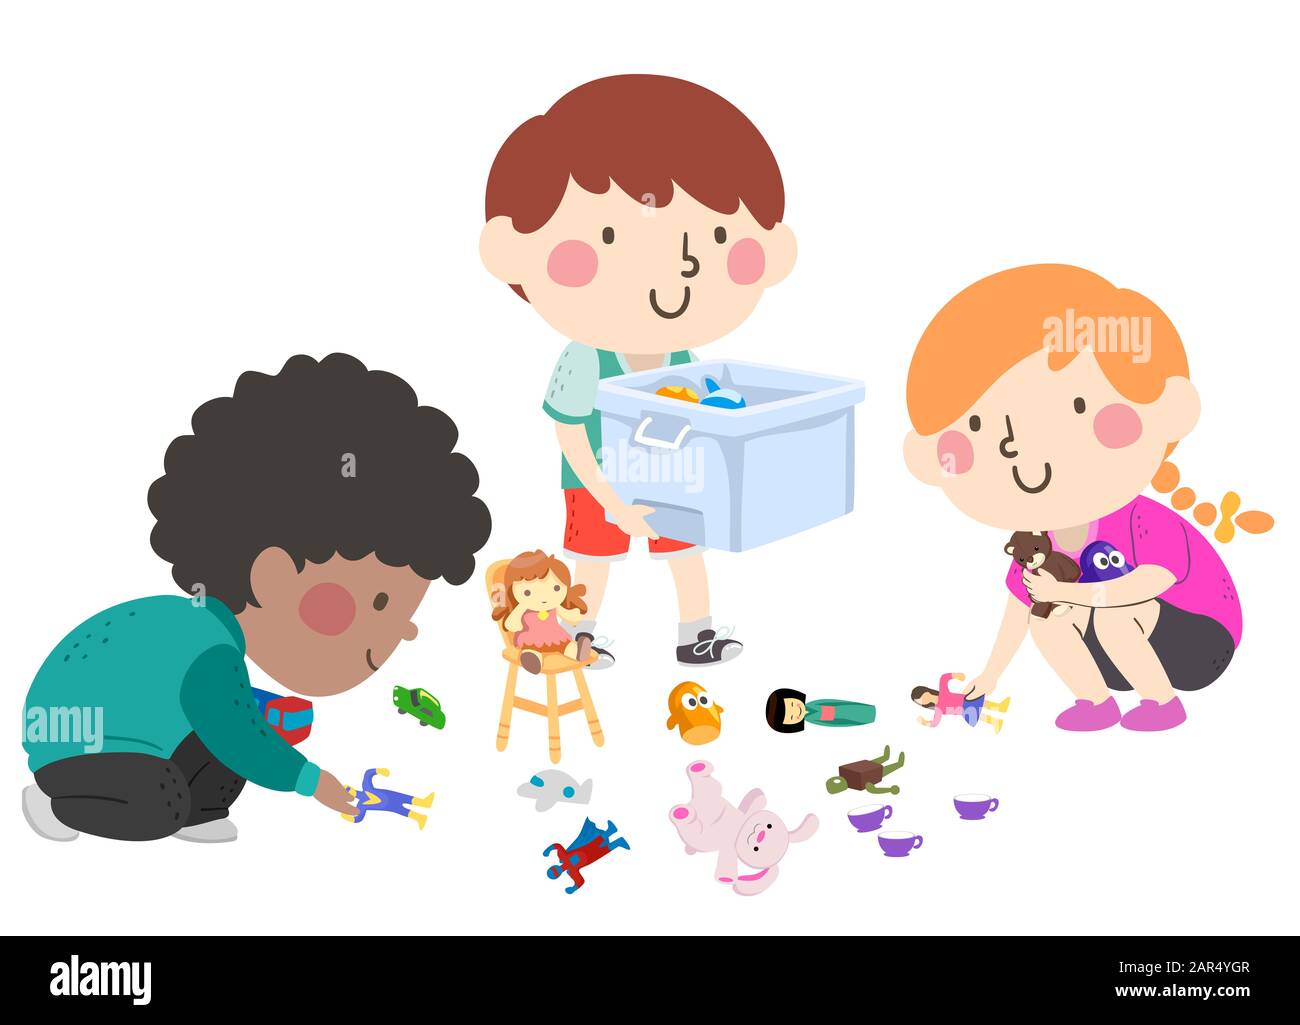 Illustration Of Kids Helping To Pick Up Toys And Put In A Container Stock Photo Alamy